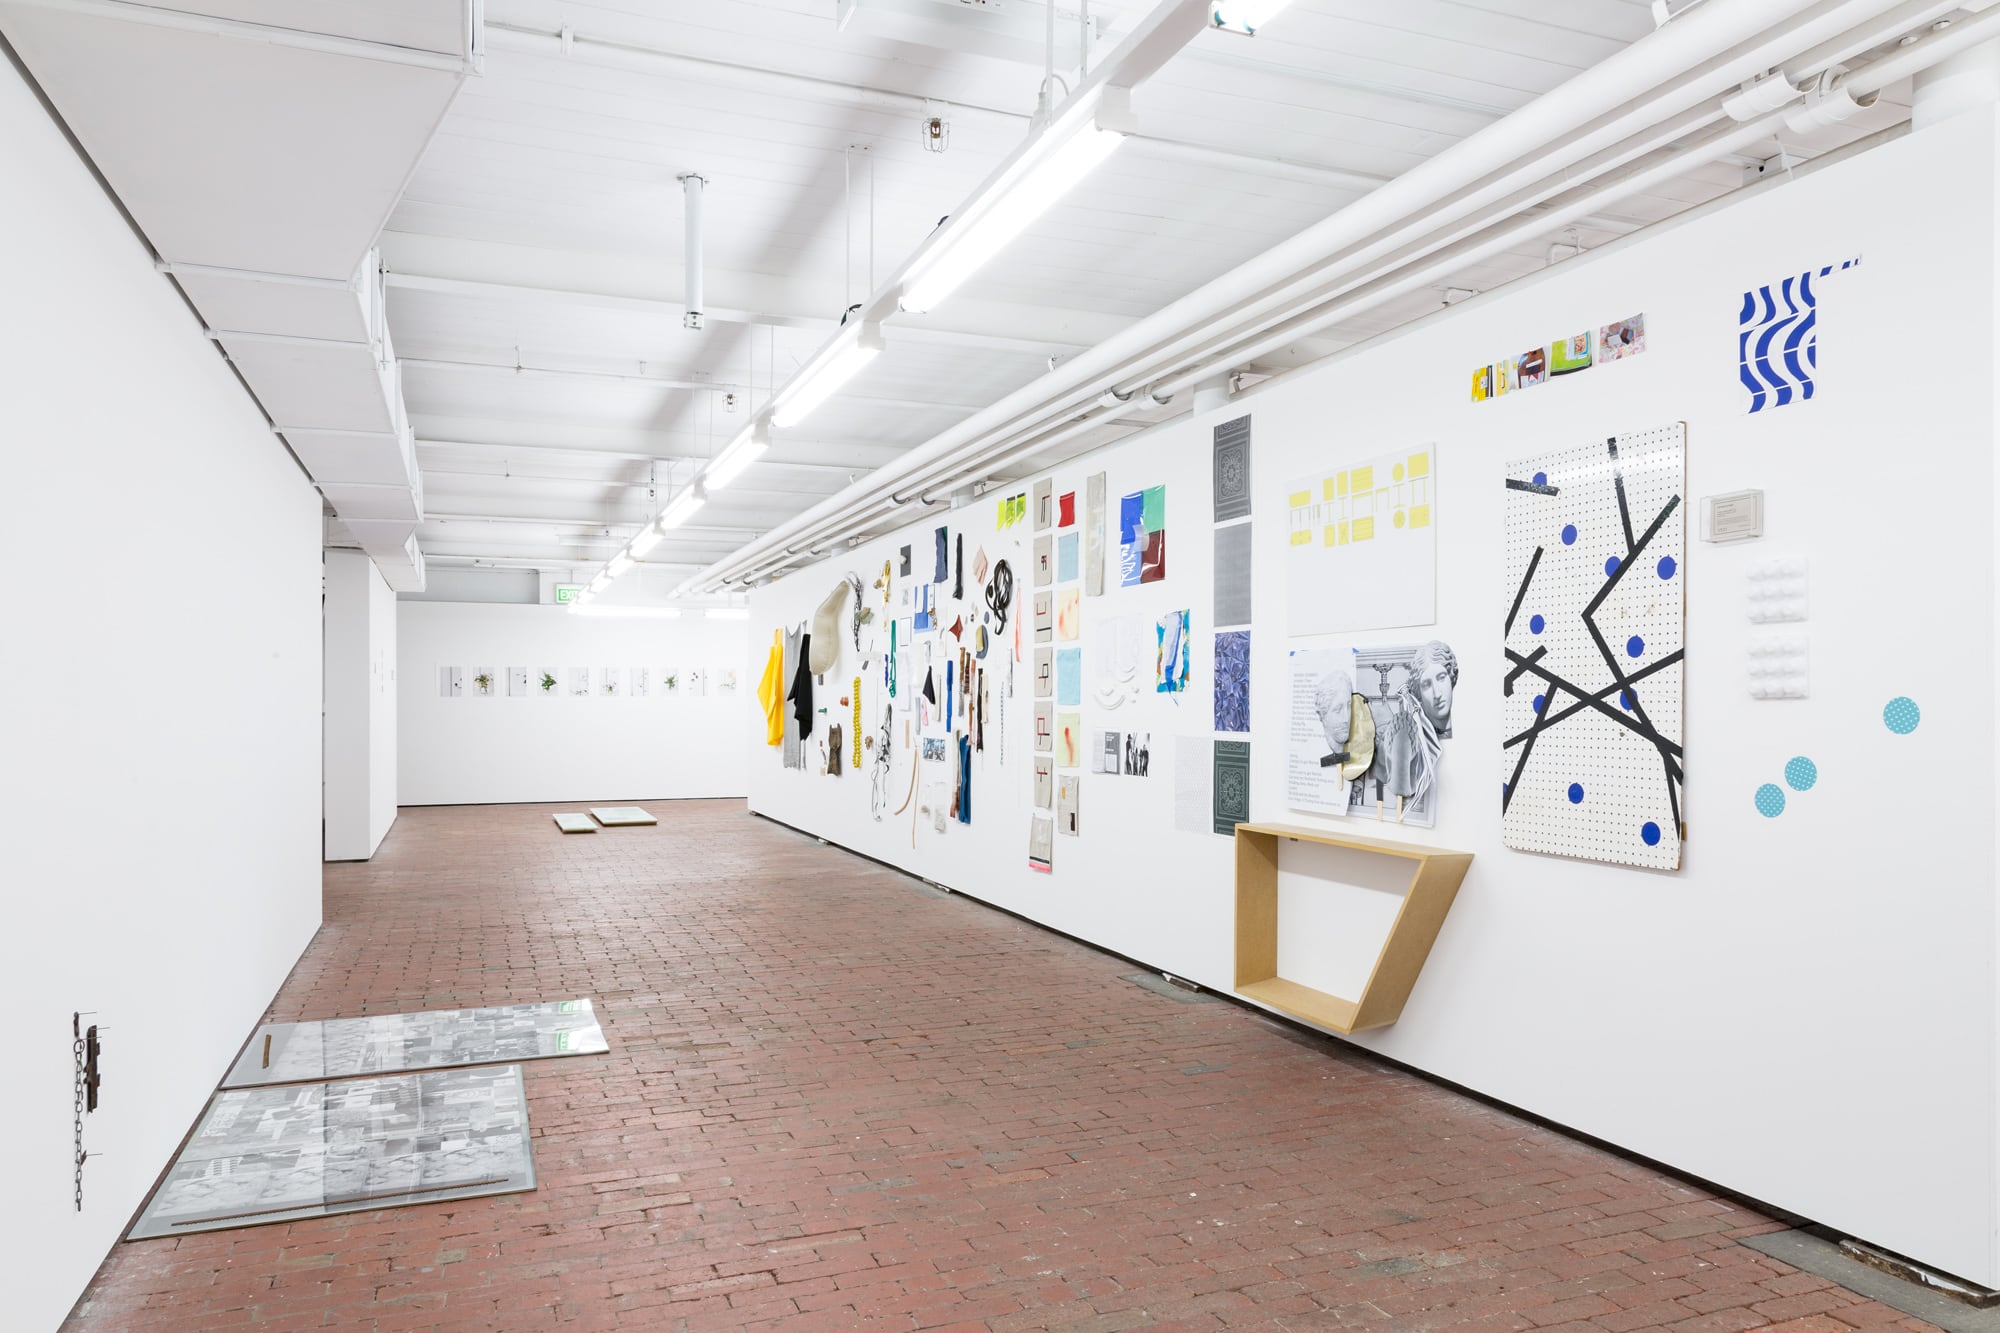 Image 04: SHE TURNS installation view. Left floors: Rebecca Thomas *Tracing over yours, twice* 2017, peg board, paper, acrylic and found objects. Rear: Meredith Turnbull *Flowers and Mirrors* 2017, archival pigment prints on Hahnemühle photo rag paper. Floor: Meredith Turnbull *Paper Portraits* 2017, glass, paper, particleboard, acrylic paint, aluminium. Wall: Meredith Turnbull *Material/Fragments* 2017 with material contributions from Fiona Abicare, Kay Abude, Damiano Bertoli, Terri Bird, Ross Coulter, Sarah crowEST, Andrea Eckersley, Debris Facility Pty Ltd, Christopher L G Hill, Jenny Hector, John Meade, Mascha Moje, Spiros Panigirakis, Sean Peoples, Lisa Radford, Masato Takasaka, Salote Tawale, Sarah Ujmaia, Manon van Kouswijk and Behn Ja Woods. Image courtesy the artist. Photo: Vivian Cooper Smith.